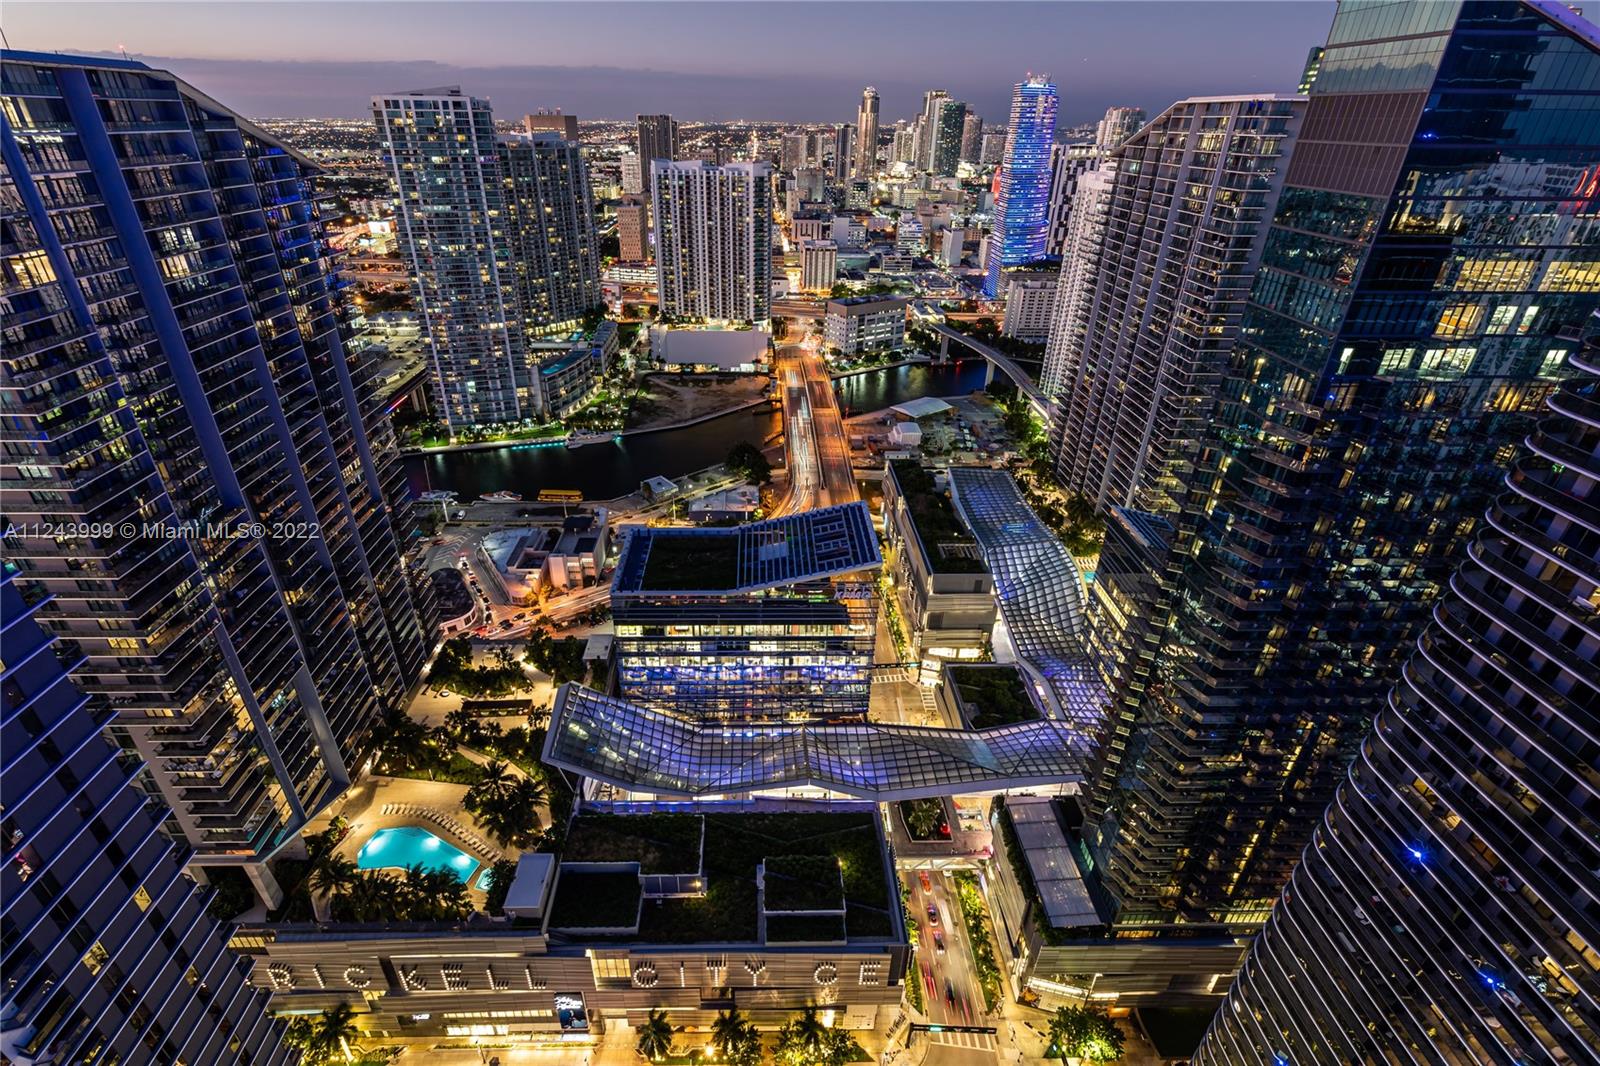 Brickell Heights East Tower image #3